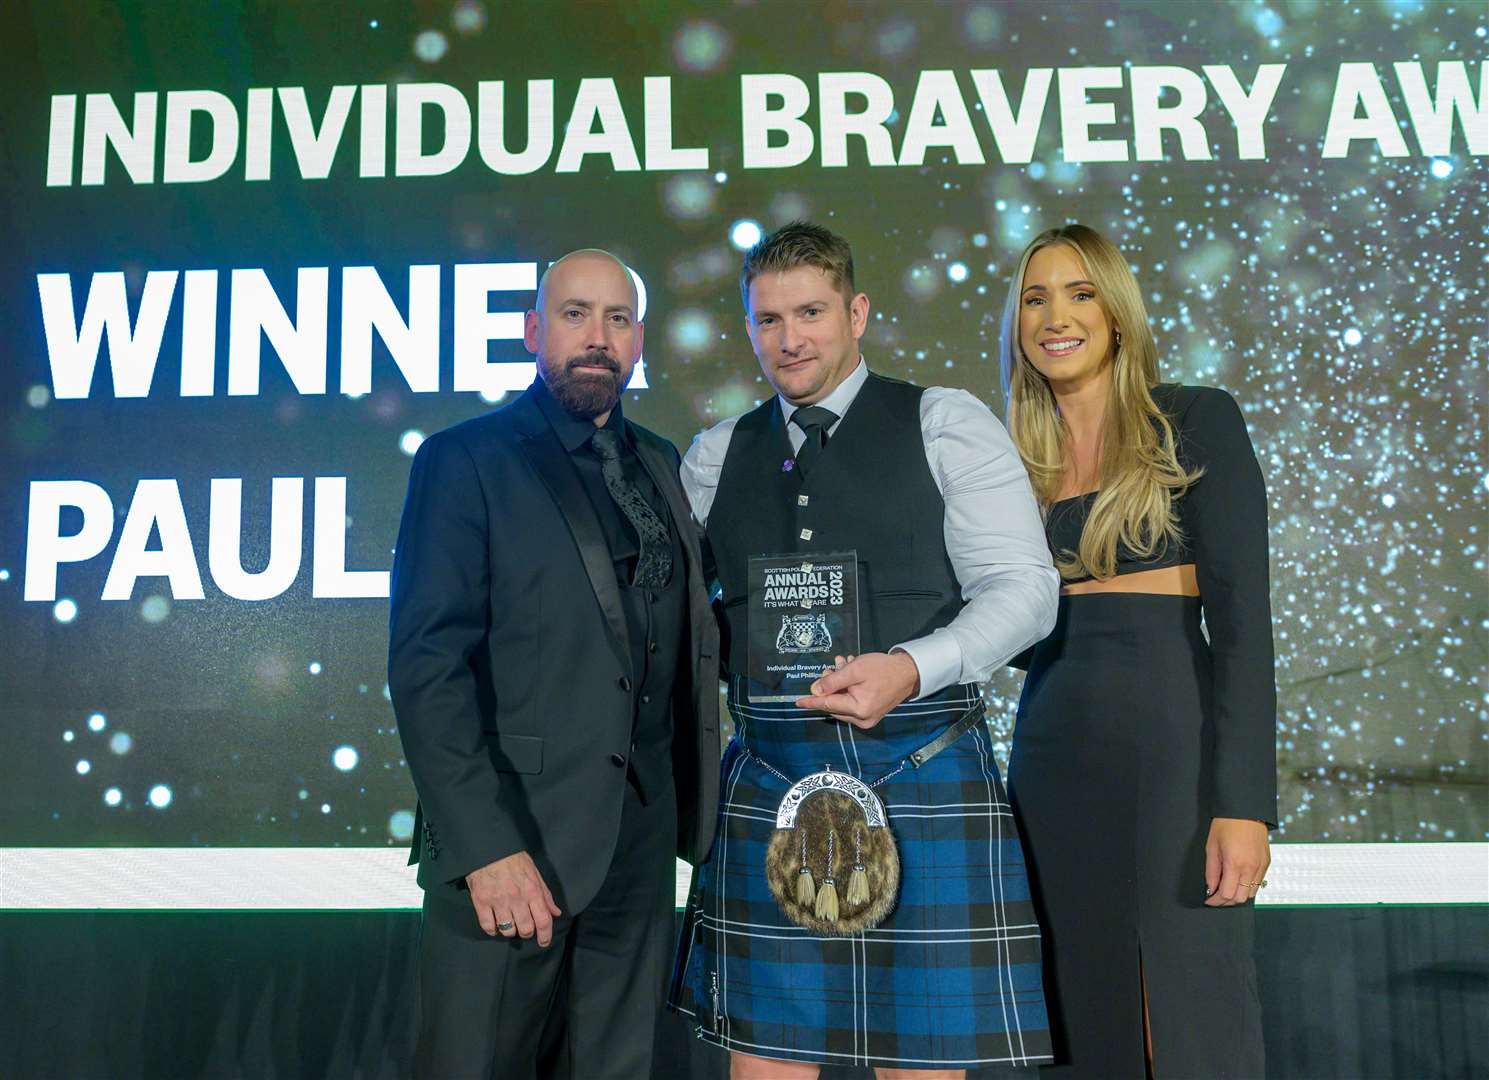 BRAVE OFFICER: Paul Phillips (centre) receives the Individual Bravery Award from David Kennedy, general secretary of the SPF, and event host Amy Irons. Picture: Sandy Young/scottishphotographer.com